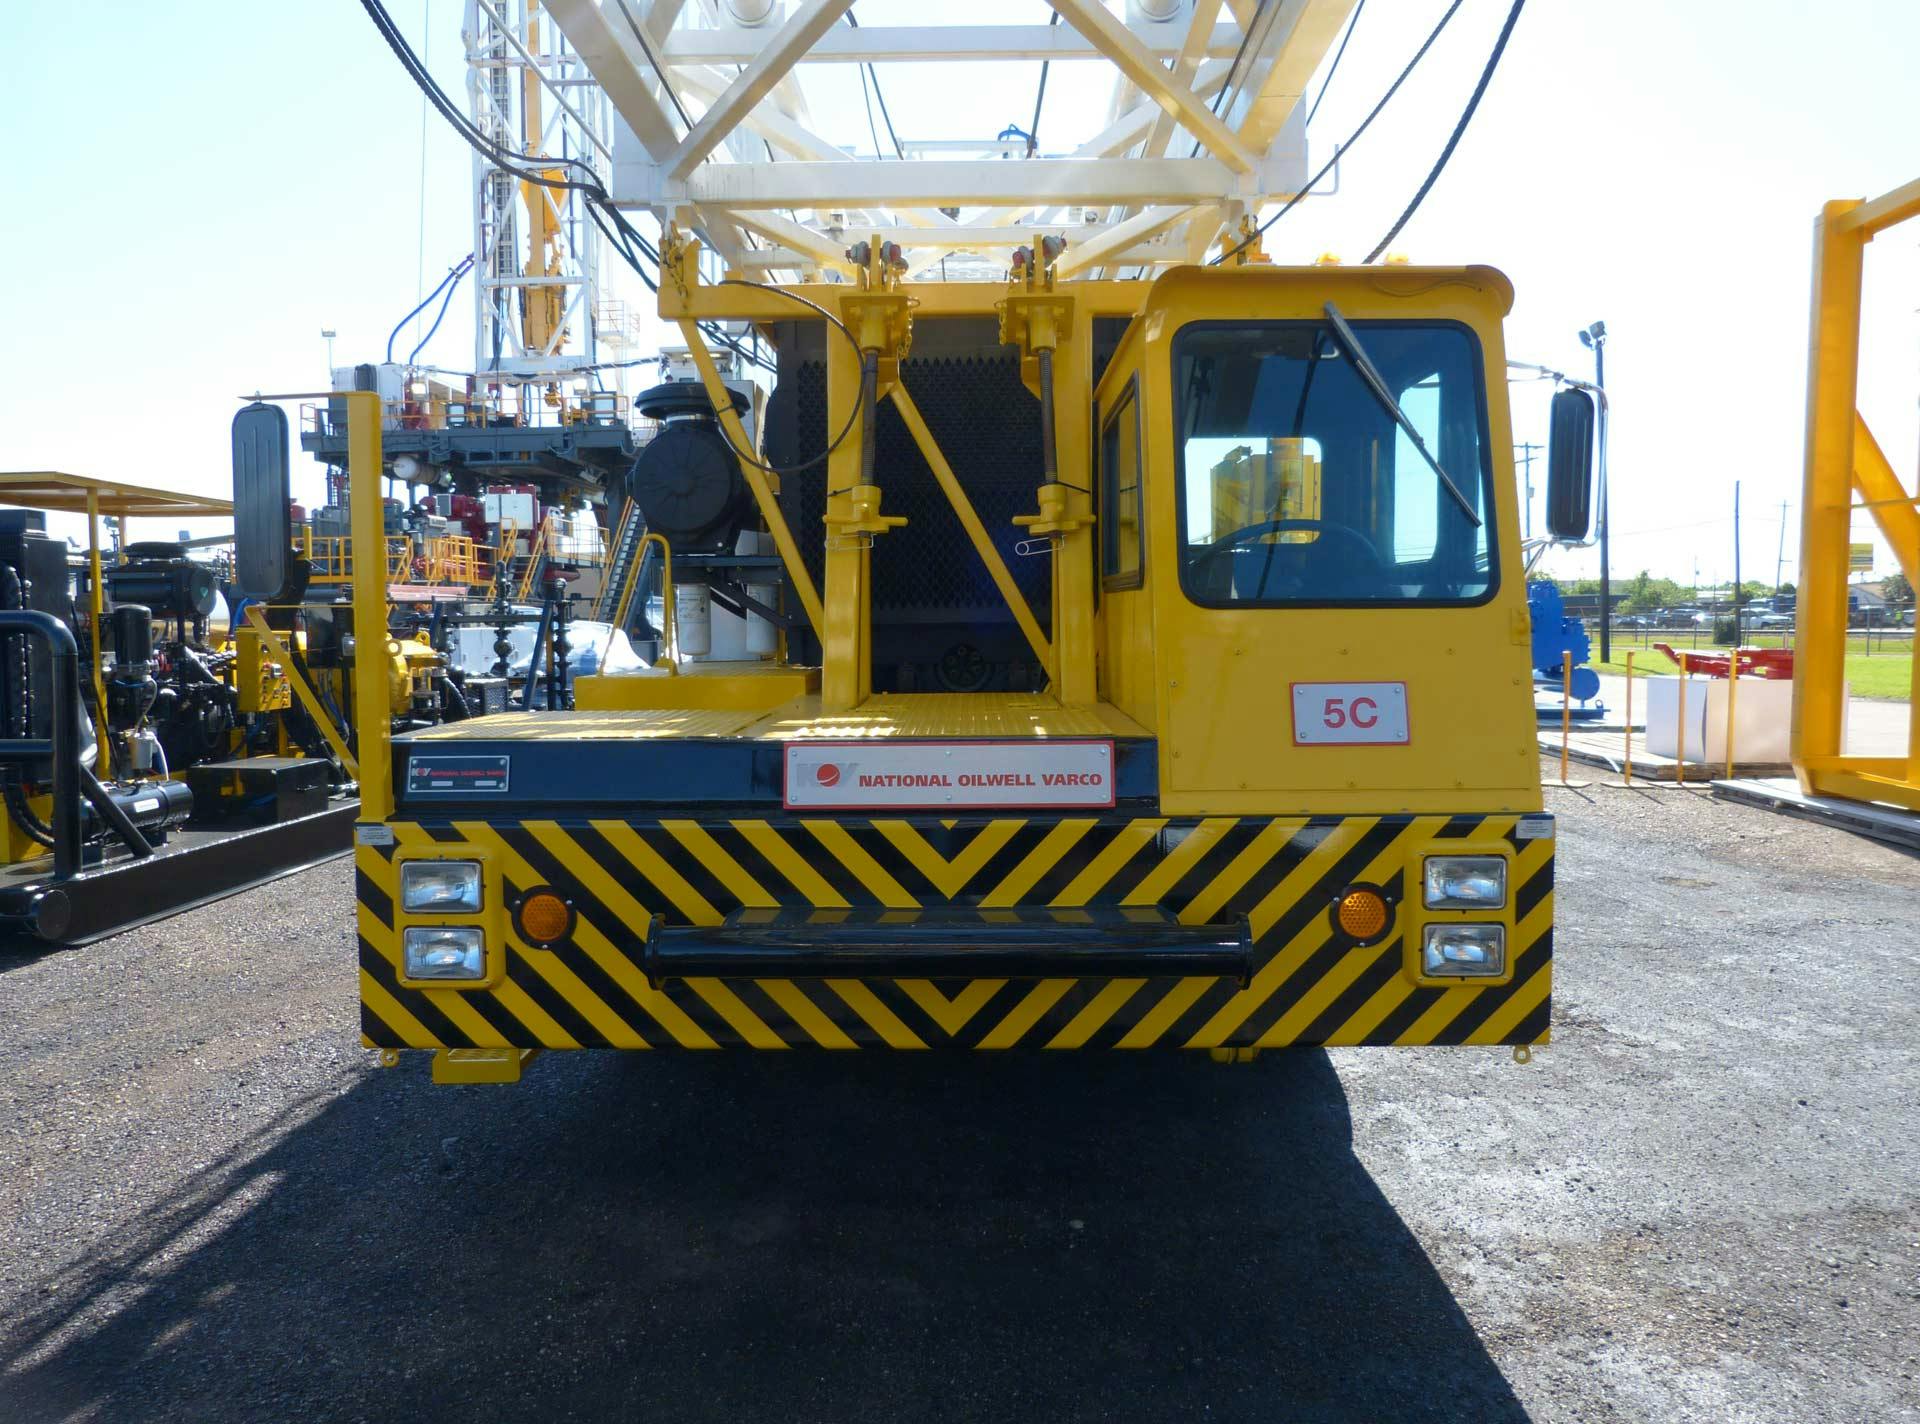 Front view of yellow mobile rig